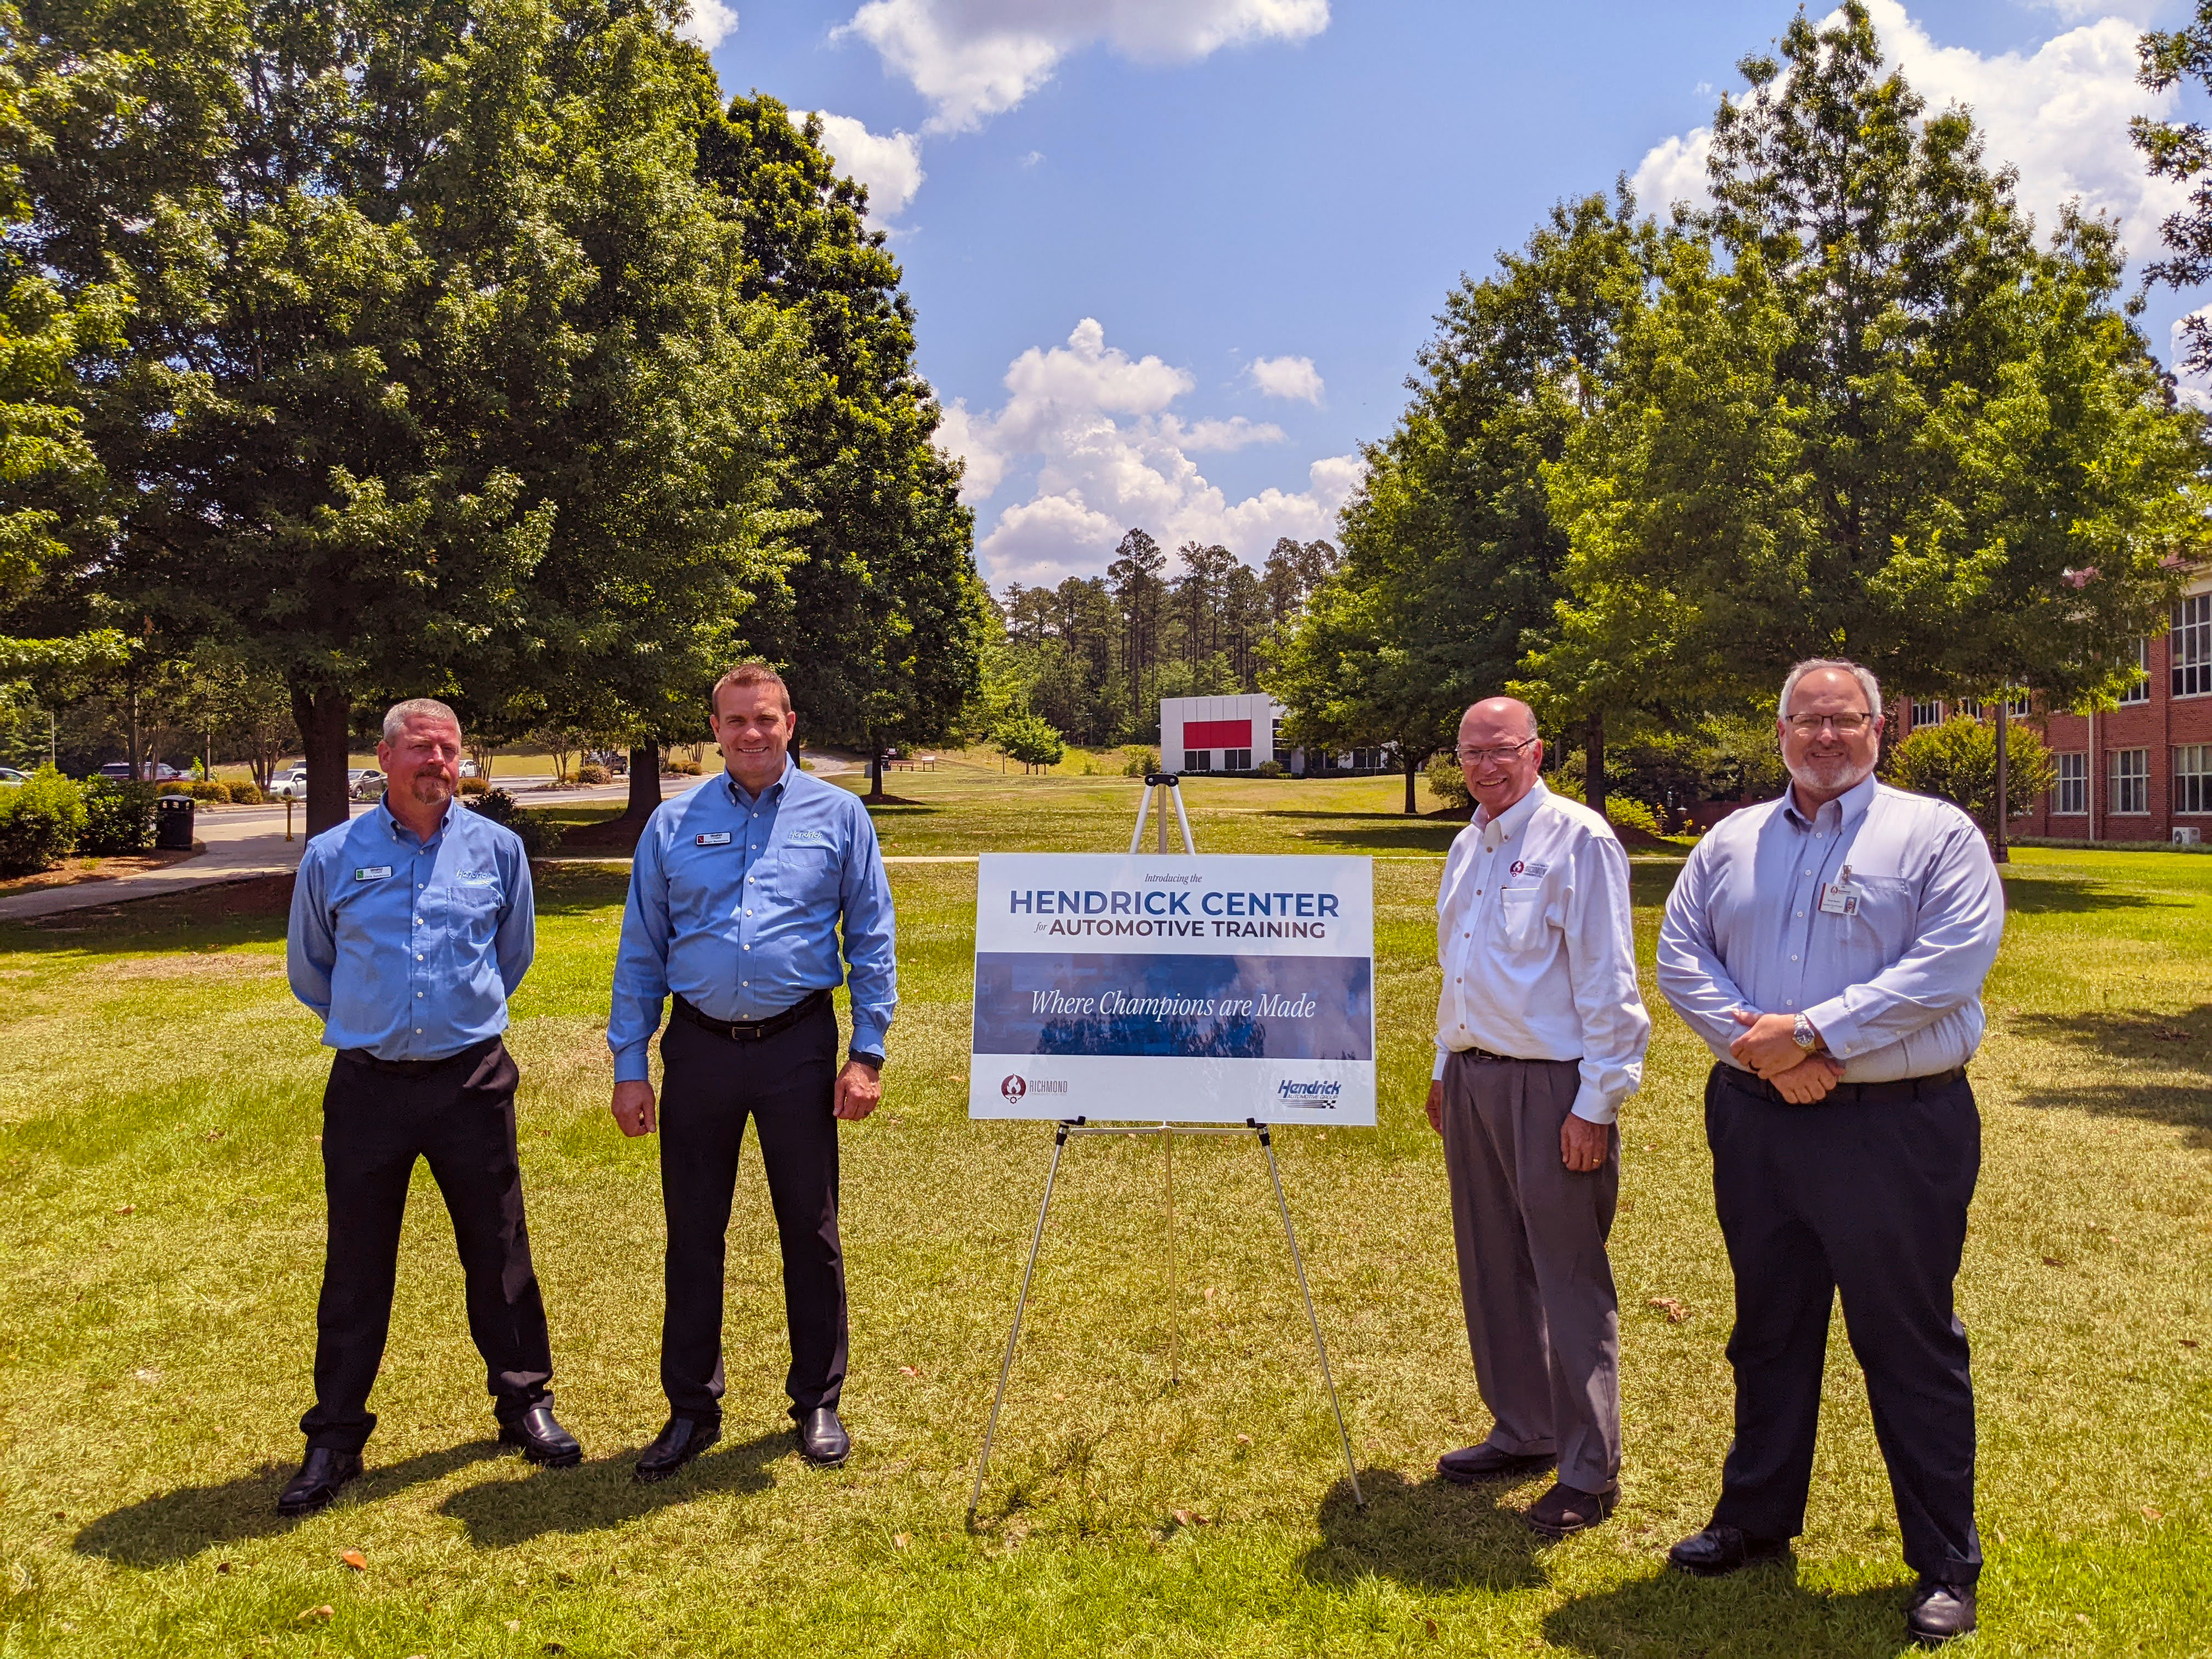 College leaders and Hendrick team members stand beside a sign for the Hendrick Center for Automotive Training on the future site of the facility.